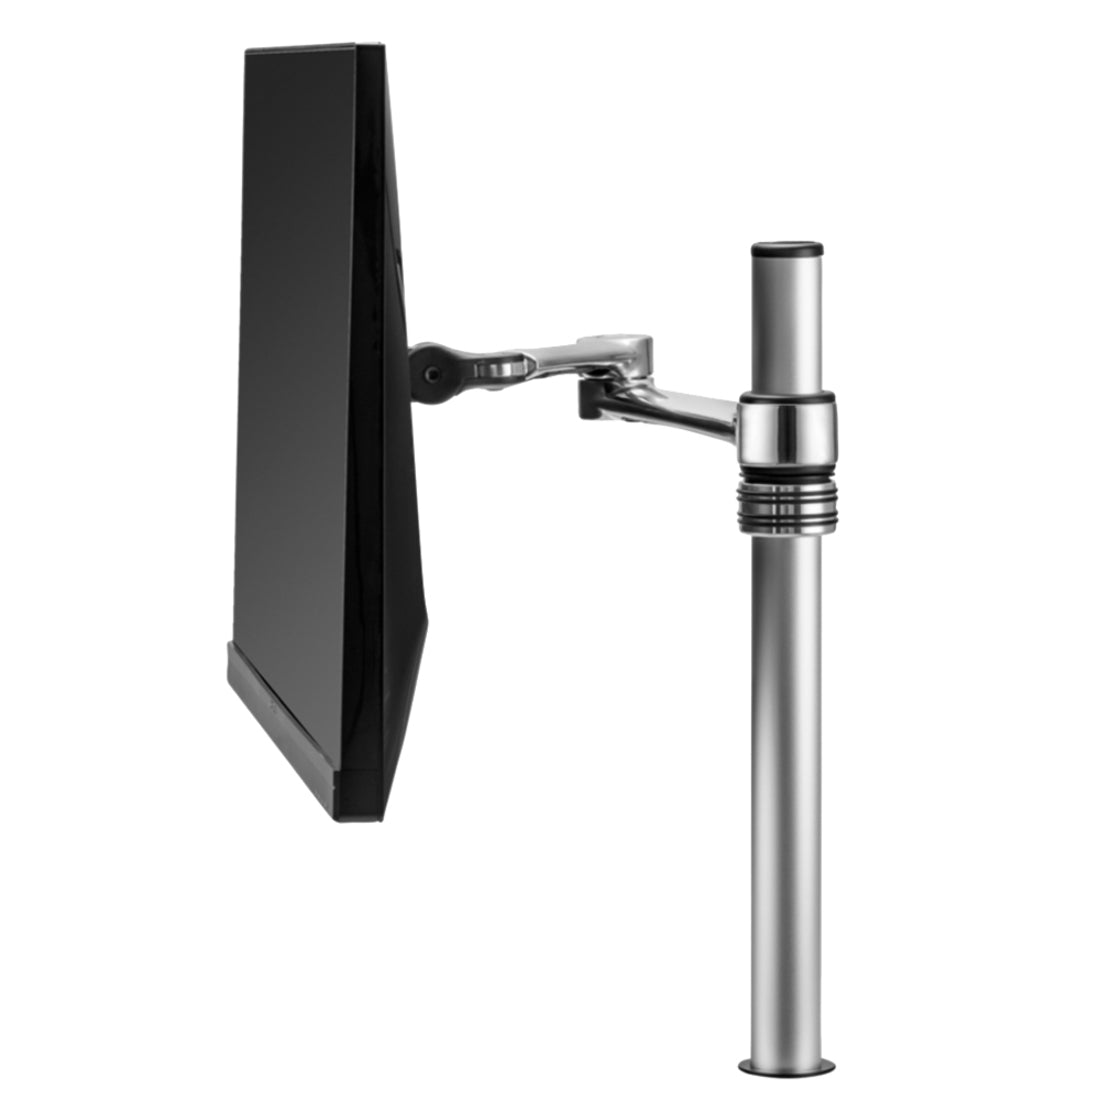 Atdec AF-AT-P Desk Mount, Silver, Holds up to 17.6lbs, Recommended for 34" Screens